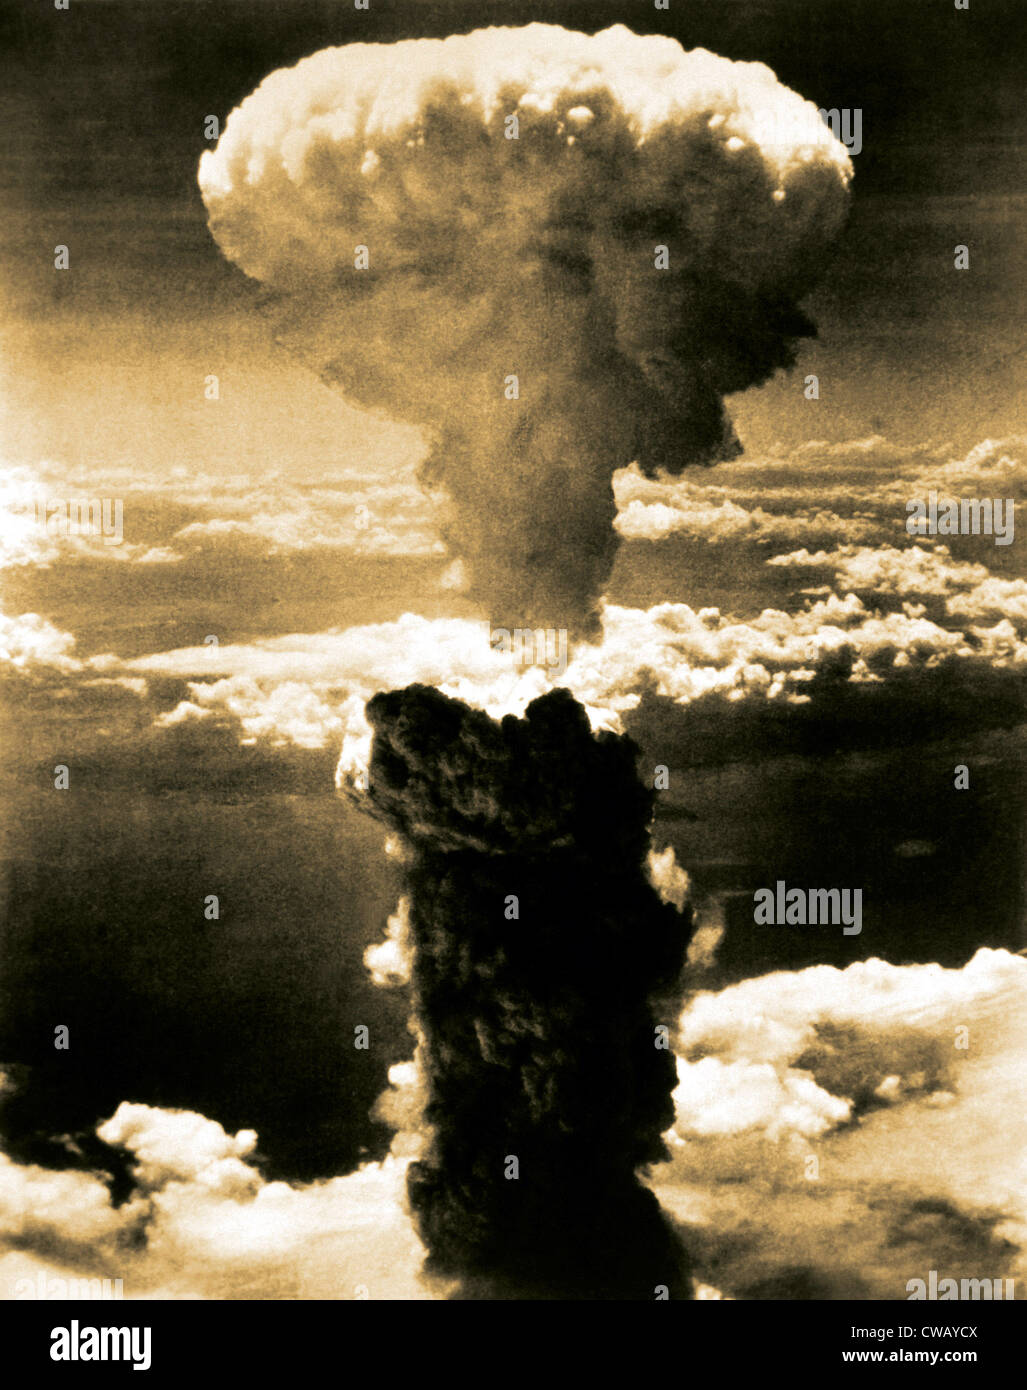 Atomic bomb. A mushroom cloud rises more than 60,000 feet into the air over Nagasaki, Japan after an atomic bomb was dropped by Stock Photo